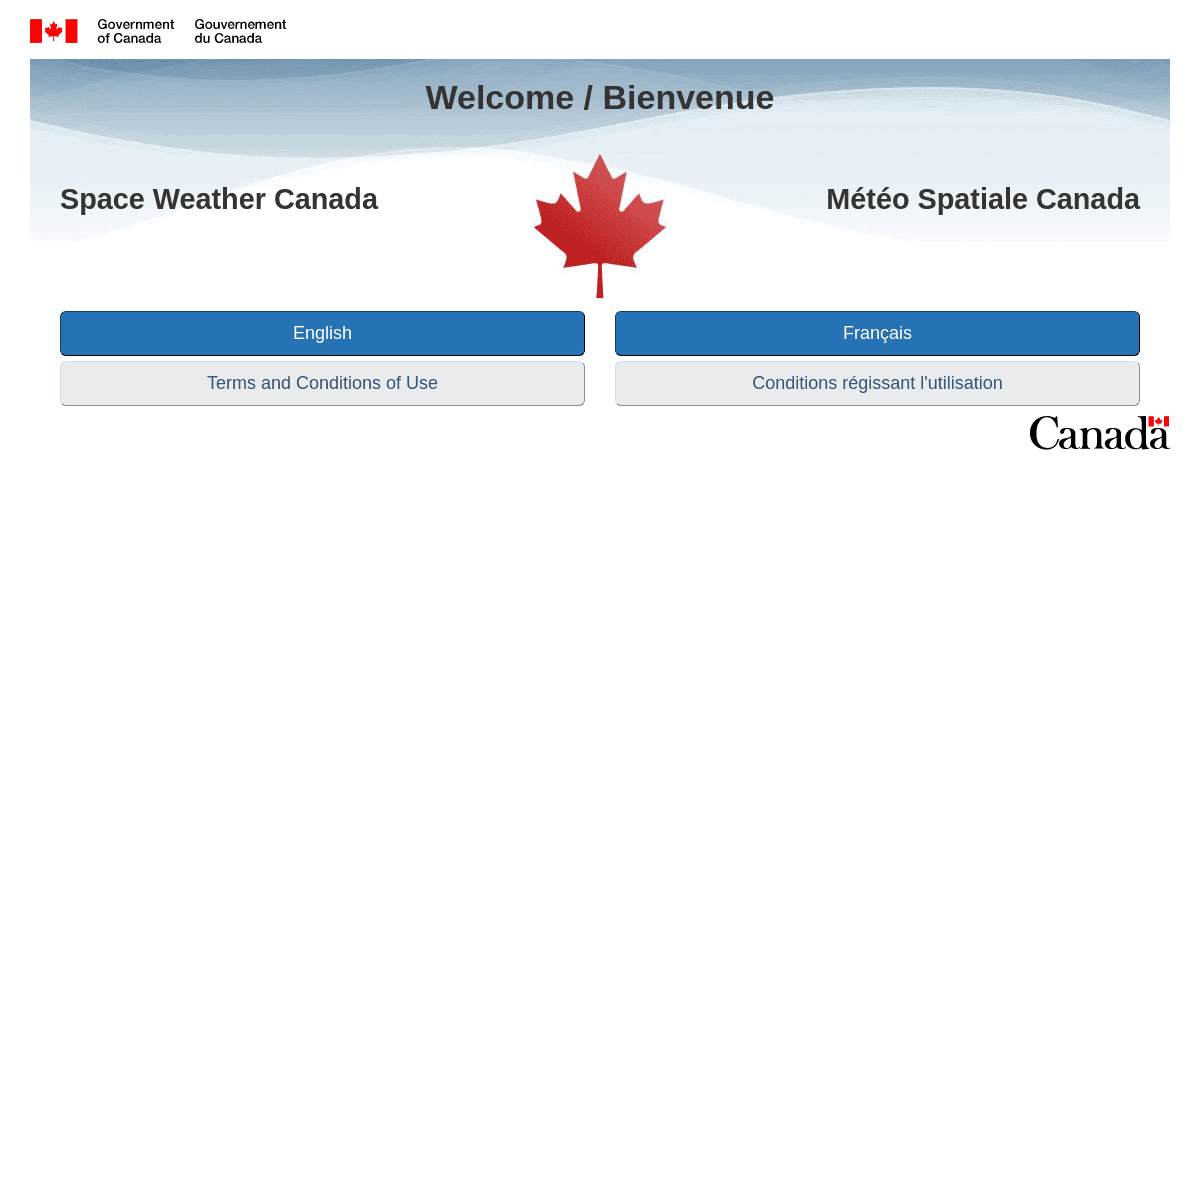 A complete backup of spaceweather.gc.ca